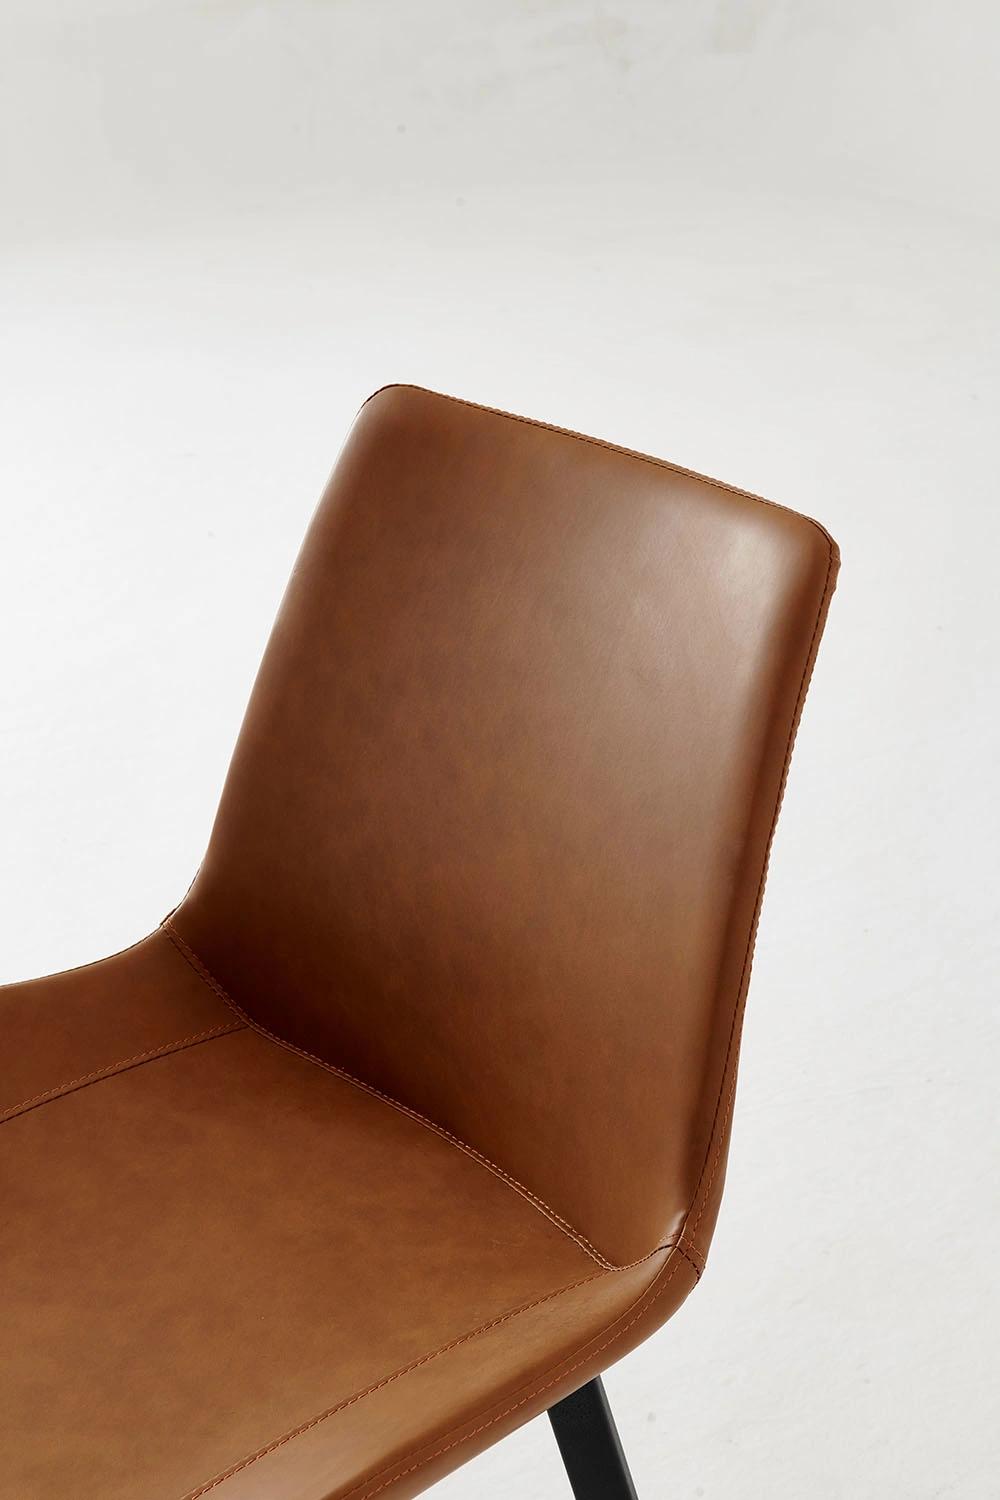 Home Luxury Funriture Brown PU Leather Dining Chair